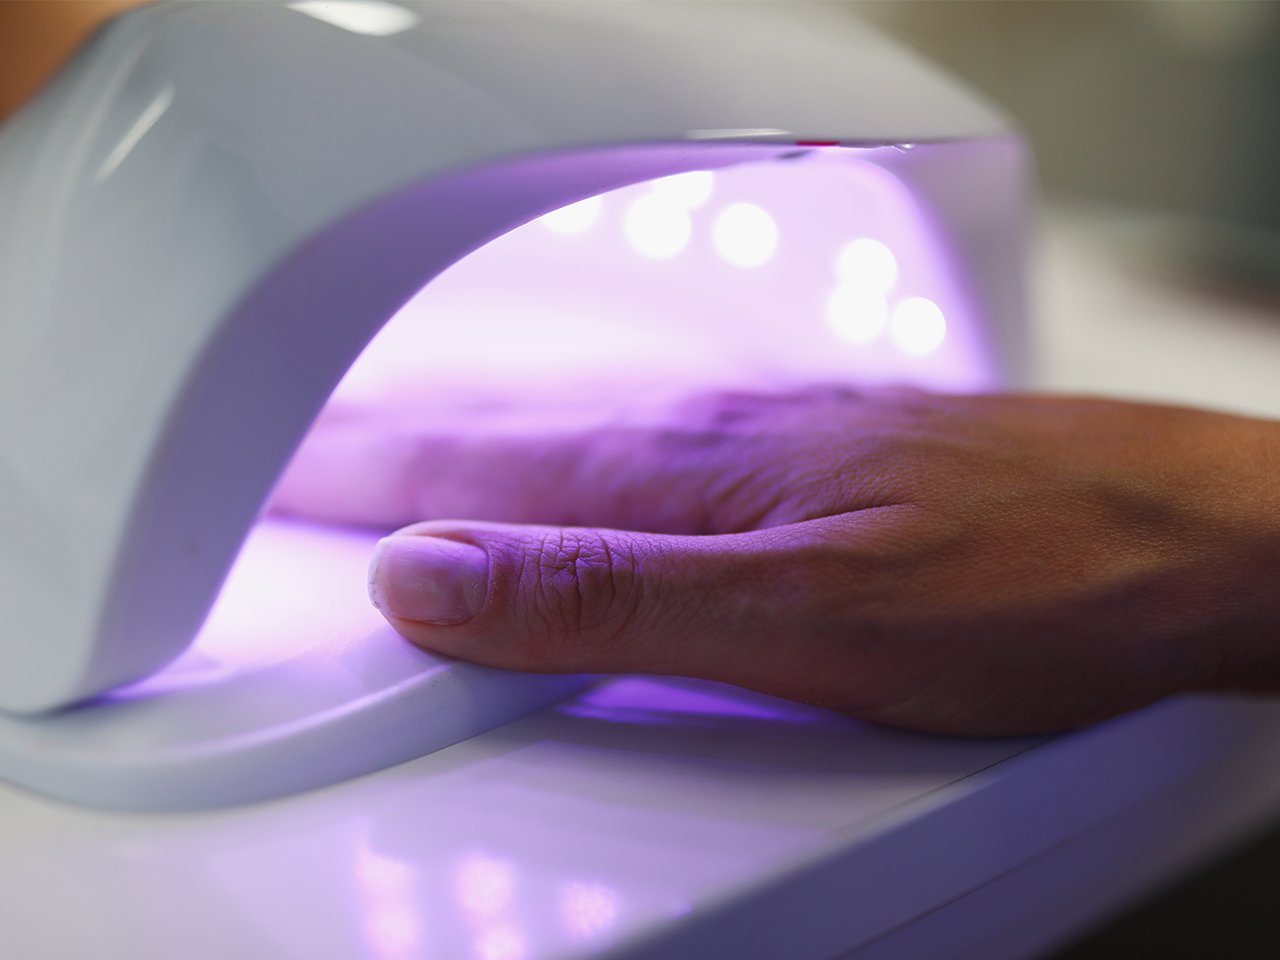 A hand in a UV curing lamp for an article on whether gel manicures are dangerous.